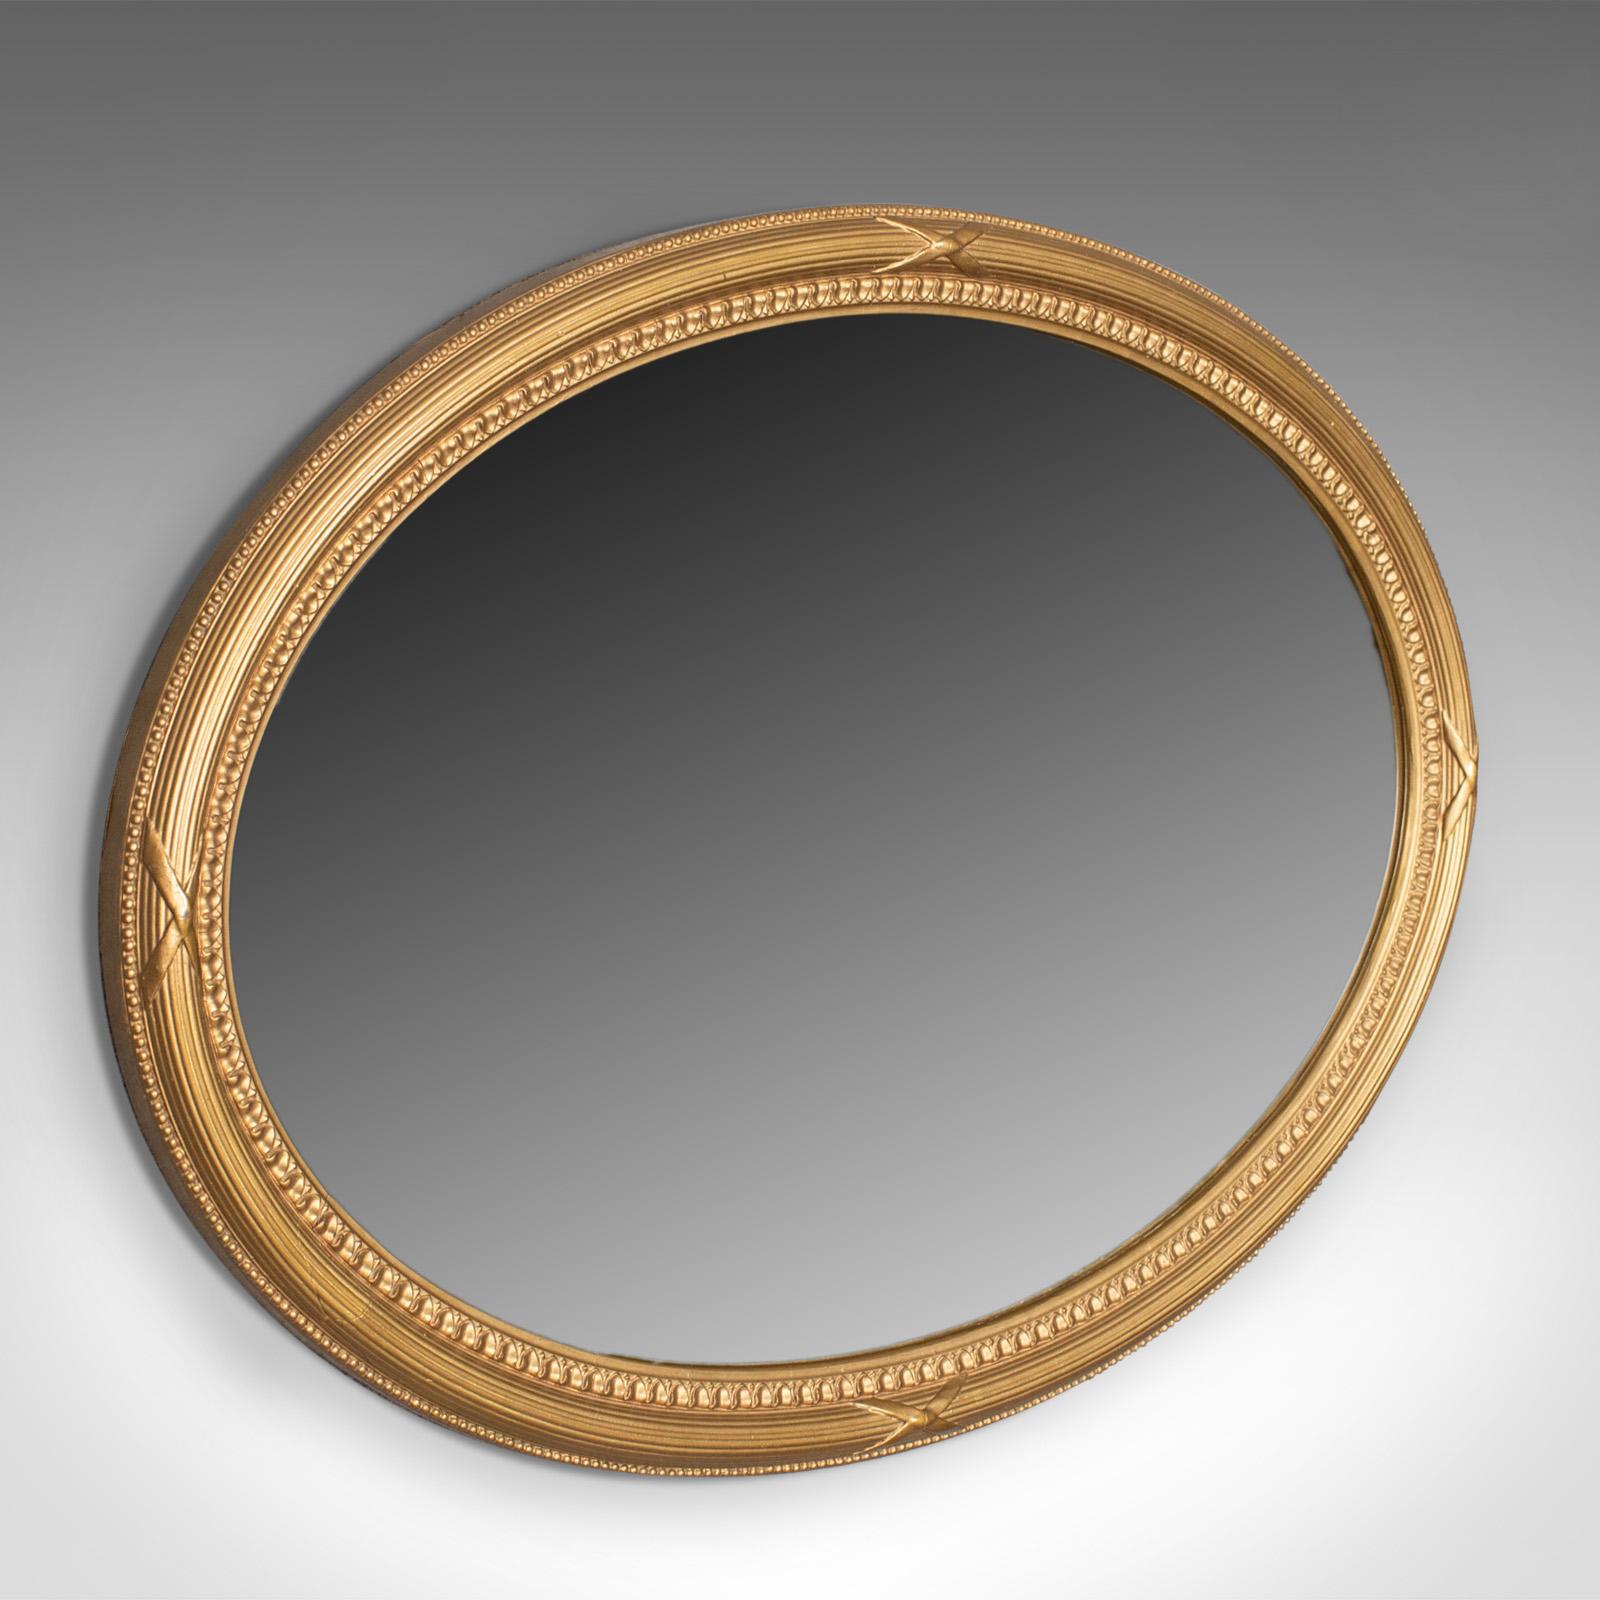 This is an antique wall mirror, an English, Early 20th century giltwood frame with later mirror plate, dating to circa 1920.

A super giltwood frame in good order
In the classical revival taste
Ovular form to hang landscape or